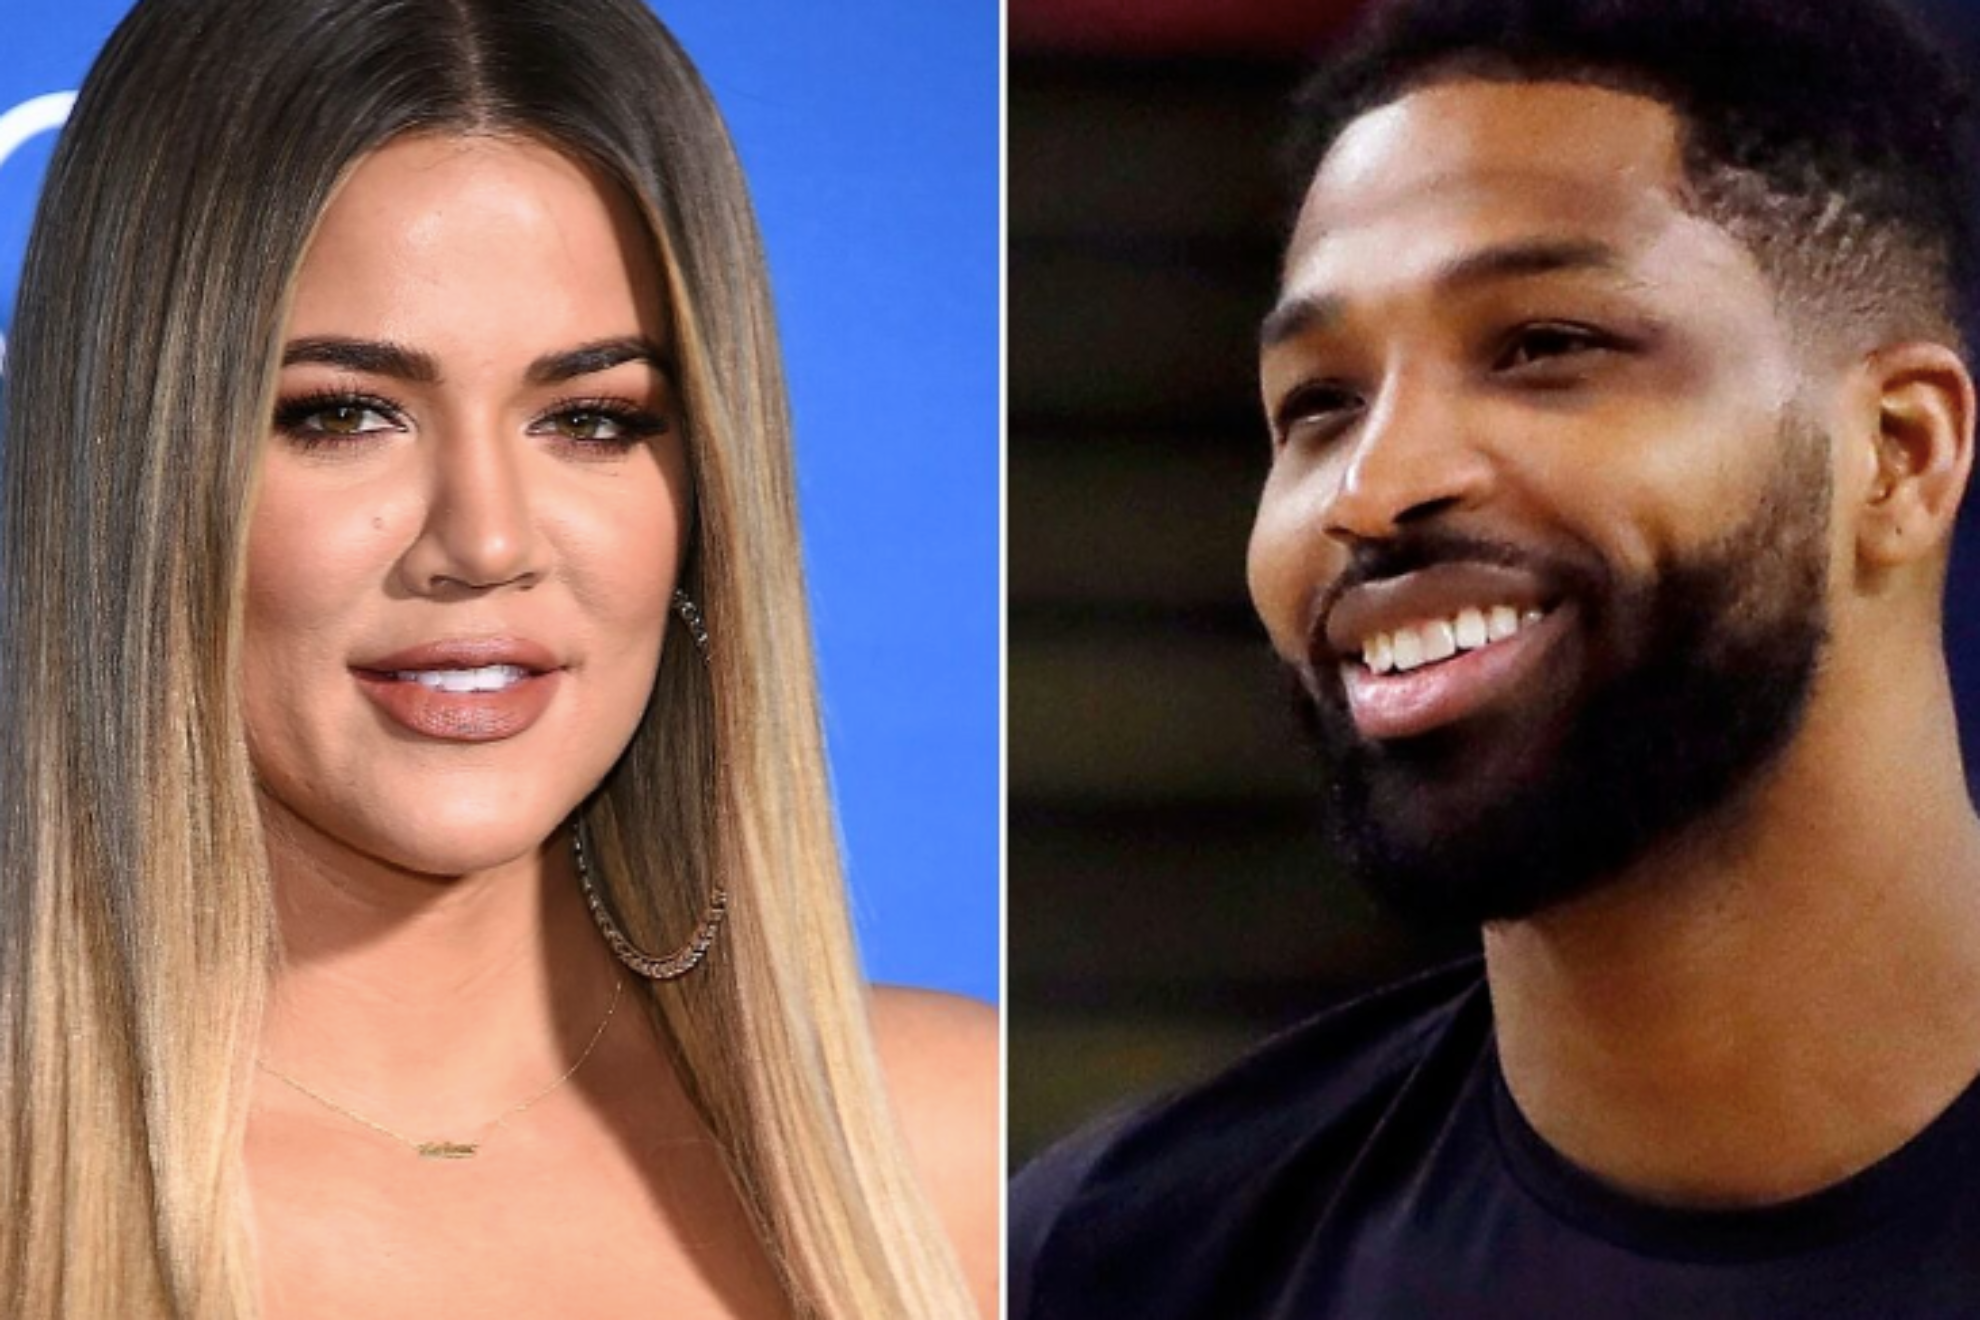 Khloe Kardashian on rumours of reconciliation with Tristan Thompson: Some things are just as simple as they seem